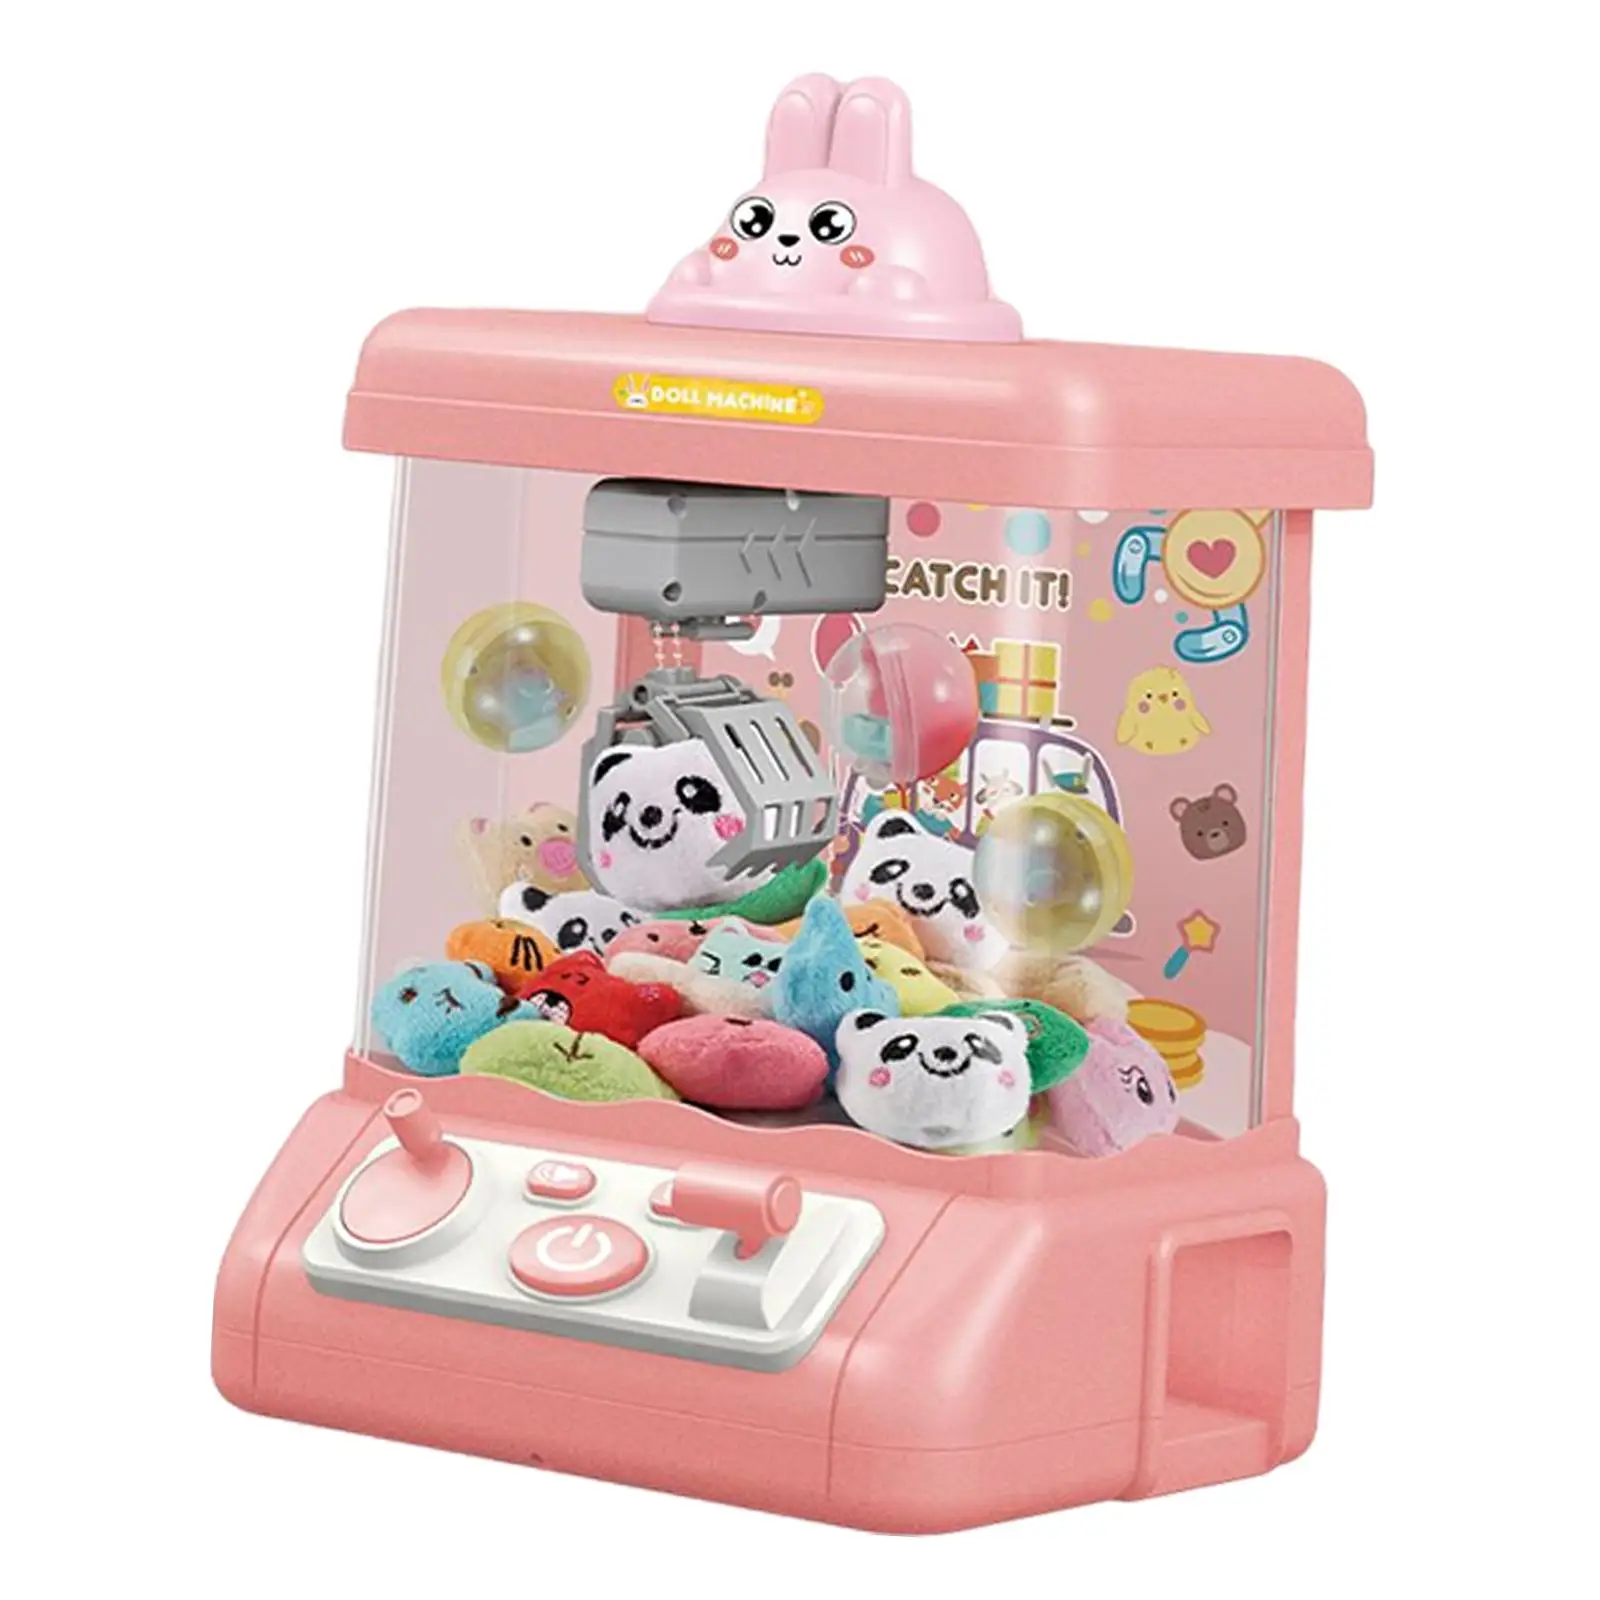 Household Claw Machine with Lights and Sound Miniature DIY Catching Doll Machine Claw Toy Grabber Machine for Birthday Gifts